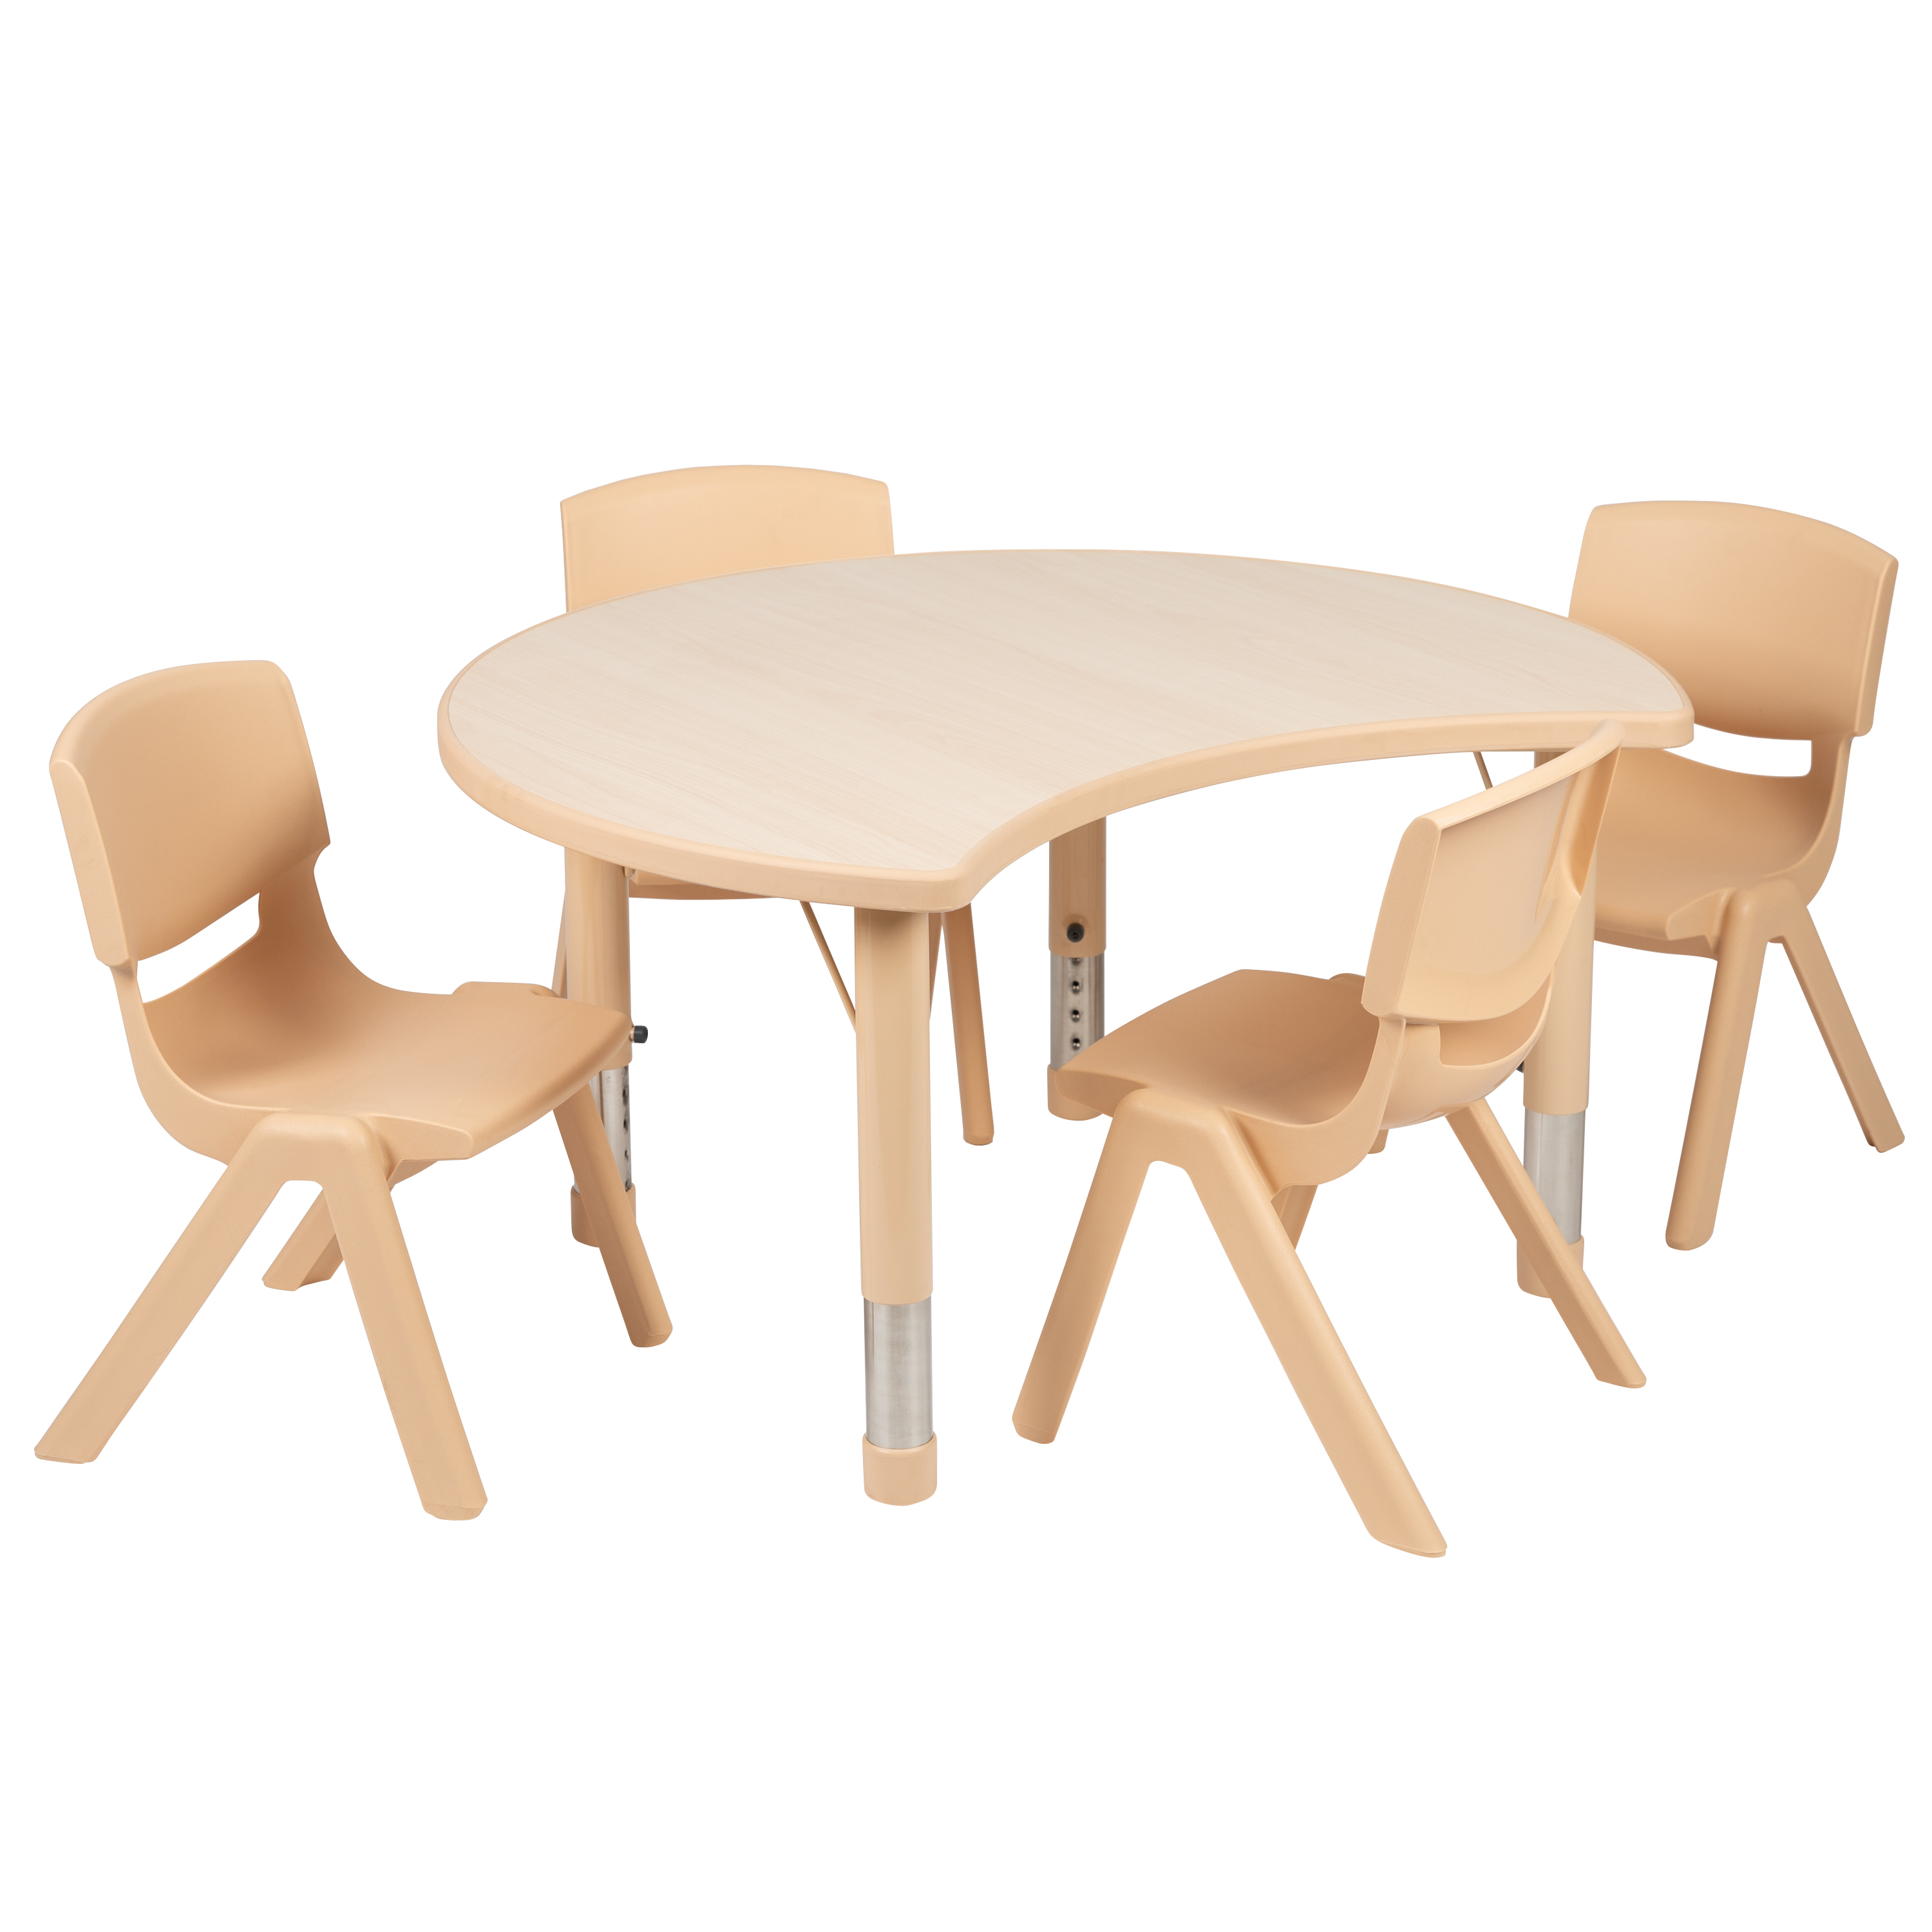 Flash Furniture YU-YCY-093-0034-CIR-TBL-NAT-GG 25.125"W x 35.5"L Crescent Natural Plastic Height Adjustable Activity Table Set with 4 Chairs